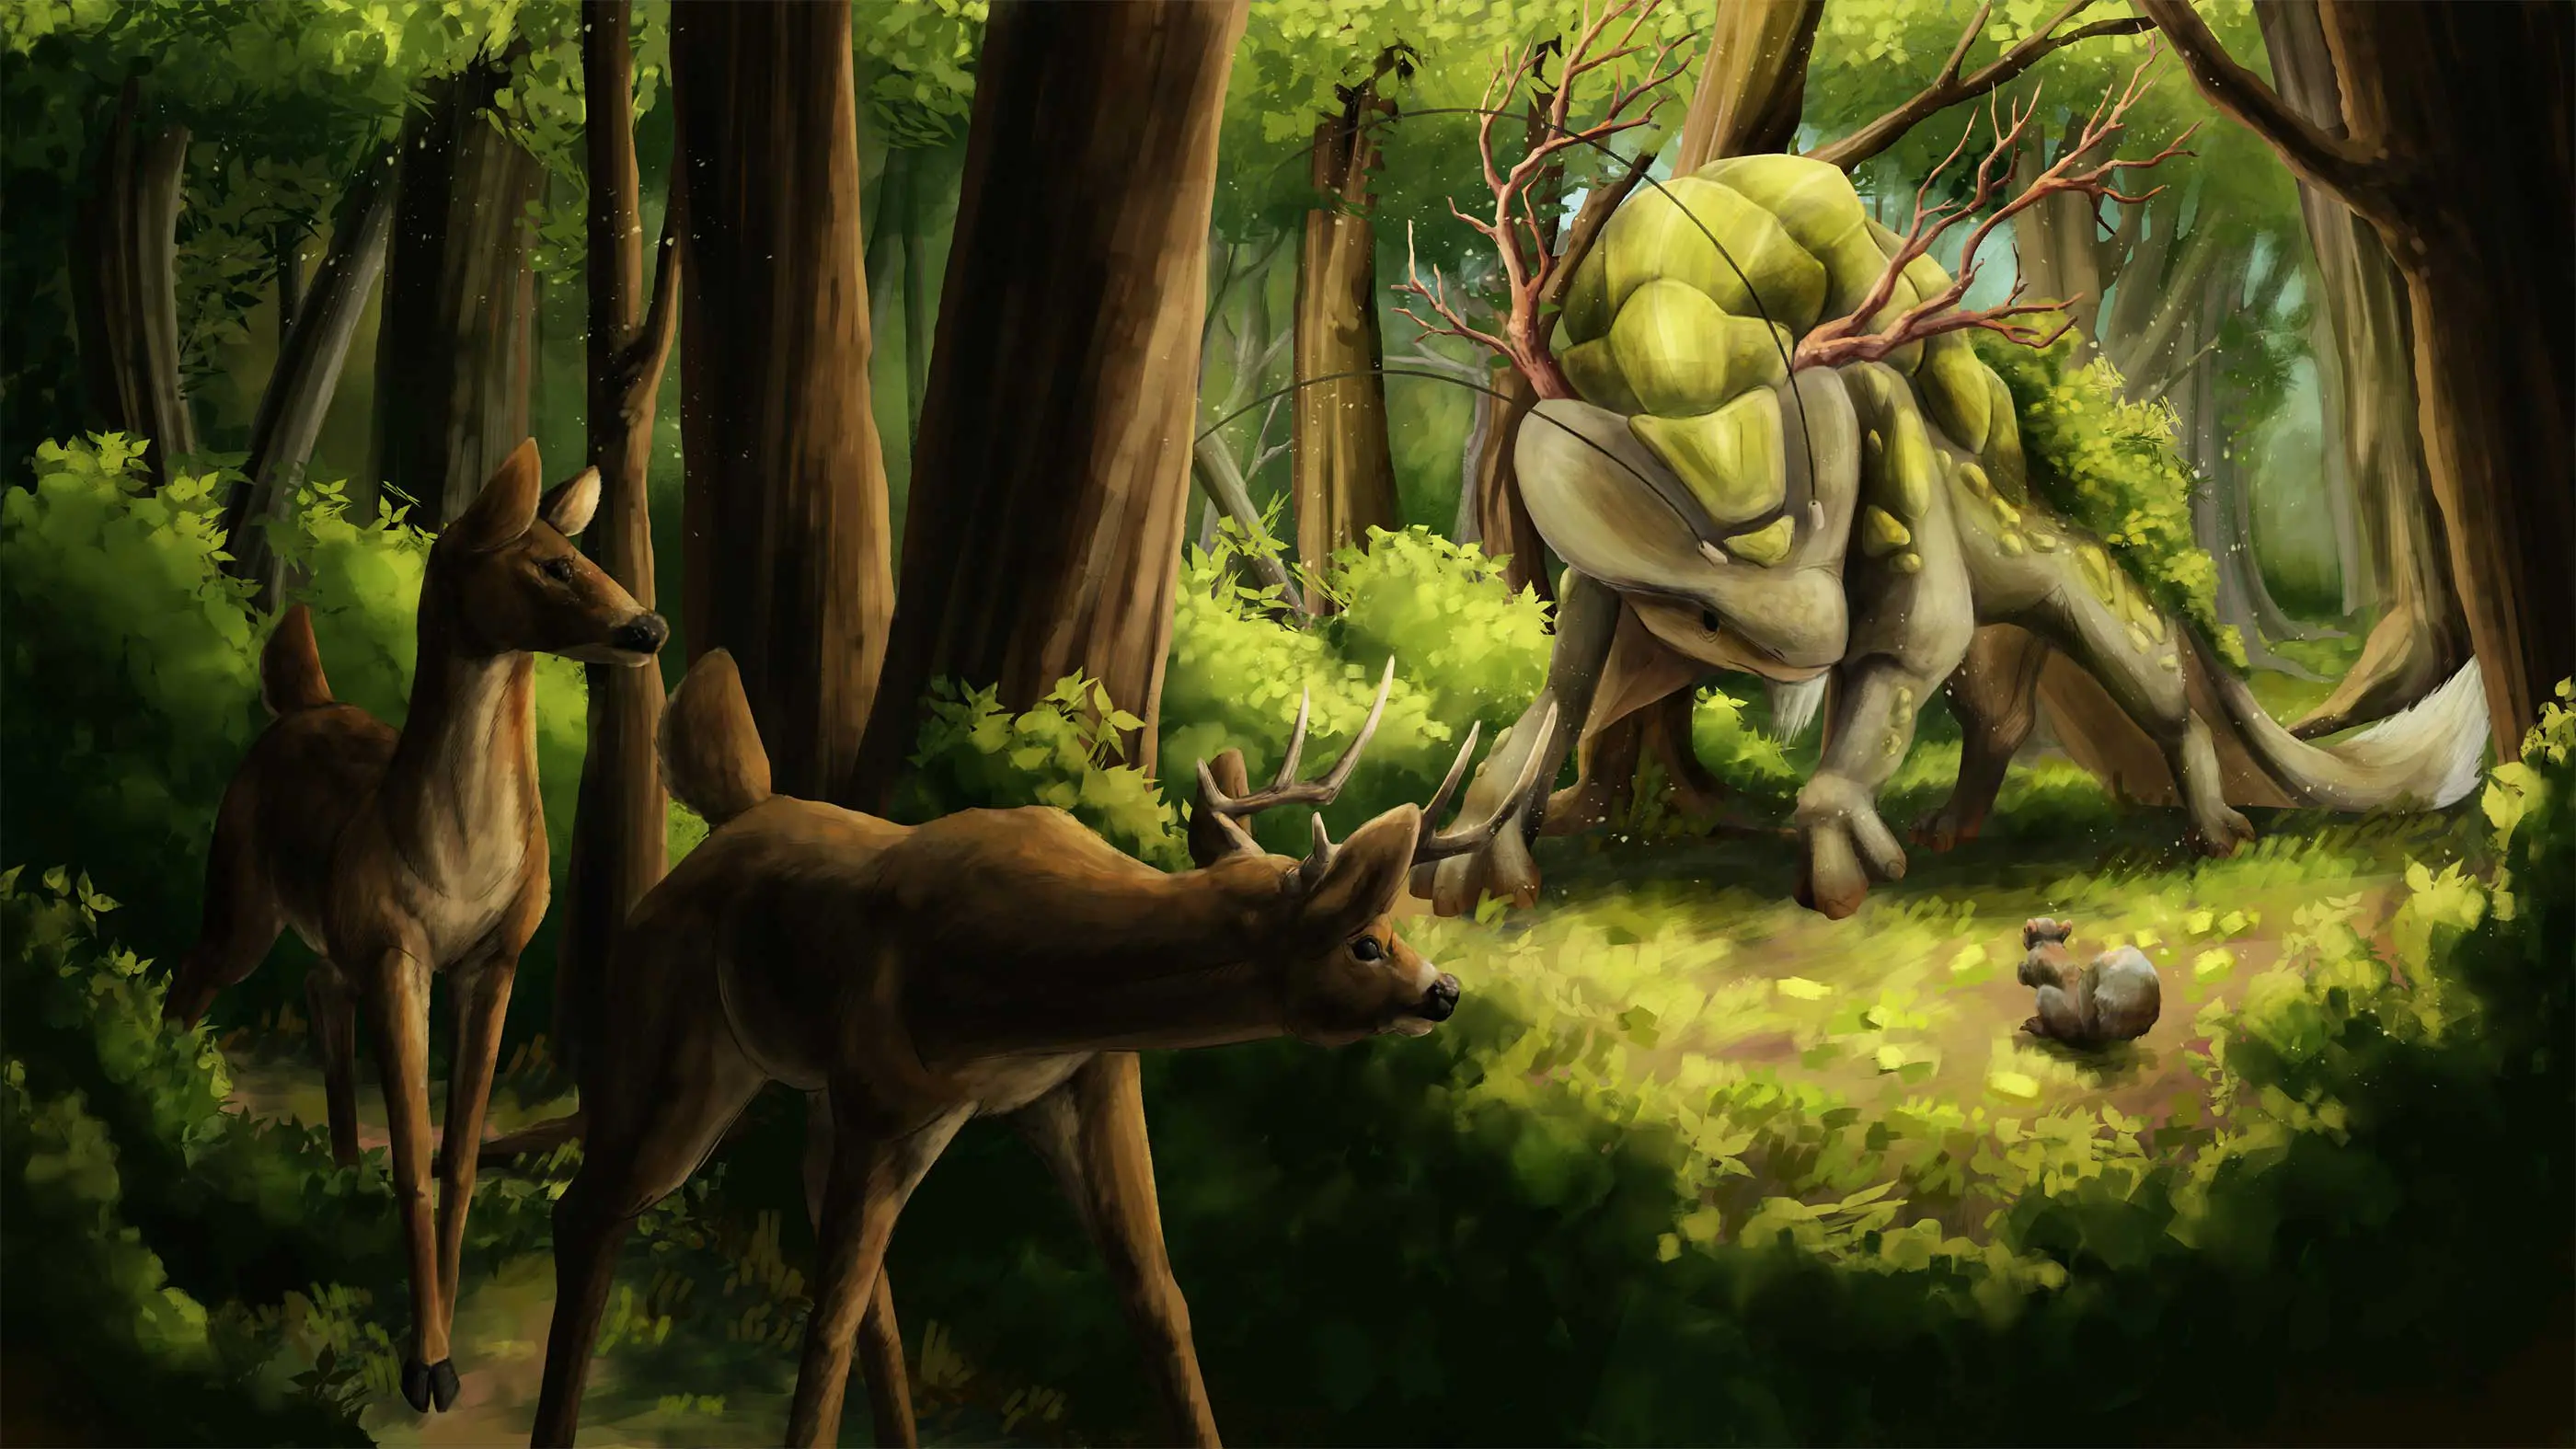 A painting of deer investigating a large dinosaur-like creature.